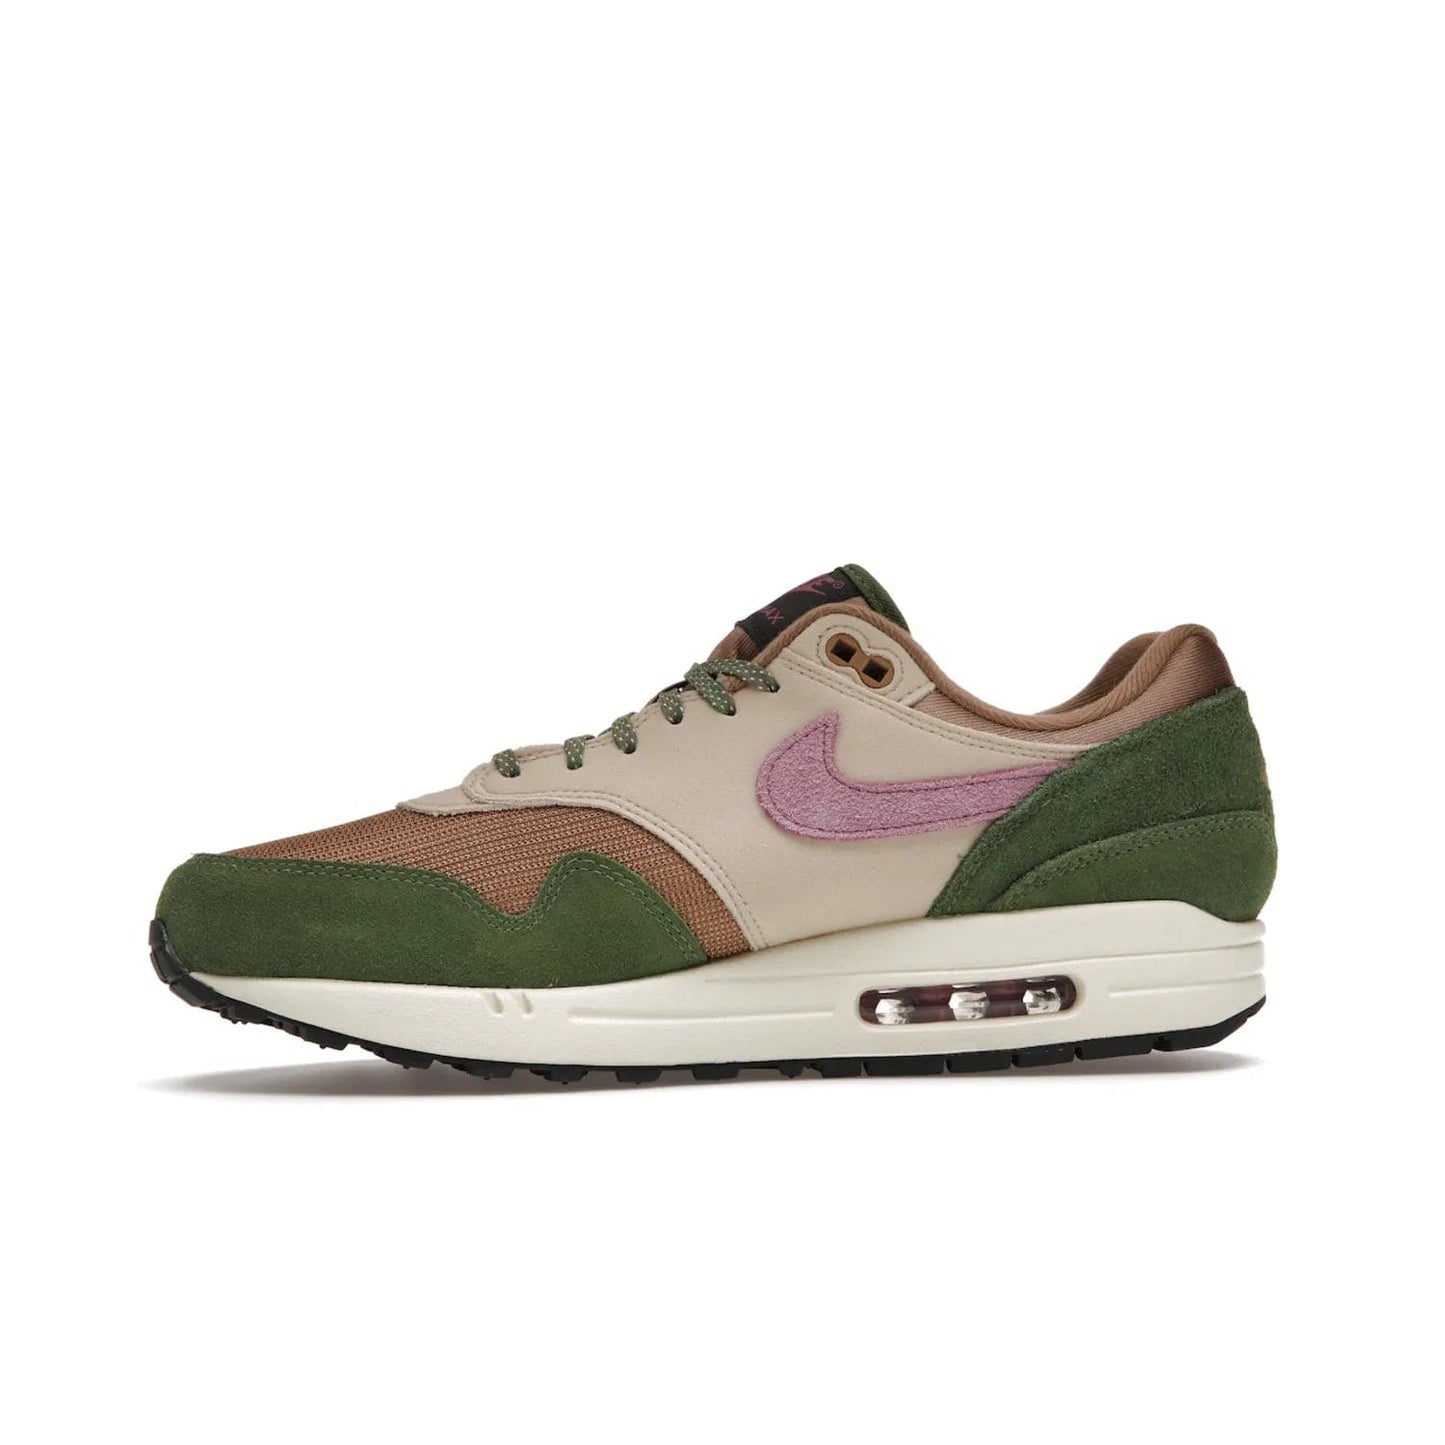 Nike Air Max 1 SH Treeline - Image 18 - Only at www.BallersClubKickz.com - A classic Nike Air Max 1 SH Treeline with a brown mesh upper, taupe Durabuck overlays, and hairy green suede details. Light Bordeaux Swoosh and woven tongue label for a pop of color. Released in May 2022. Perfect for any outfit and sure to impress.